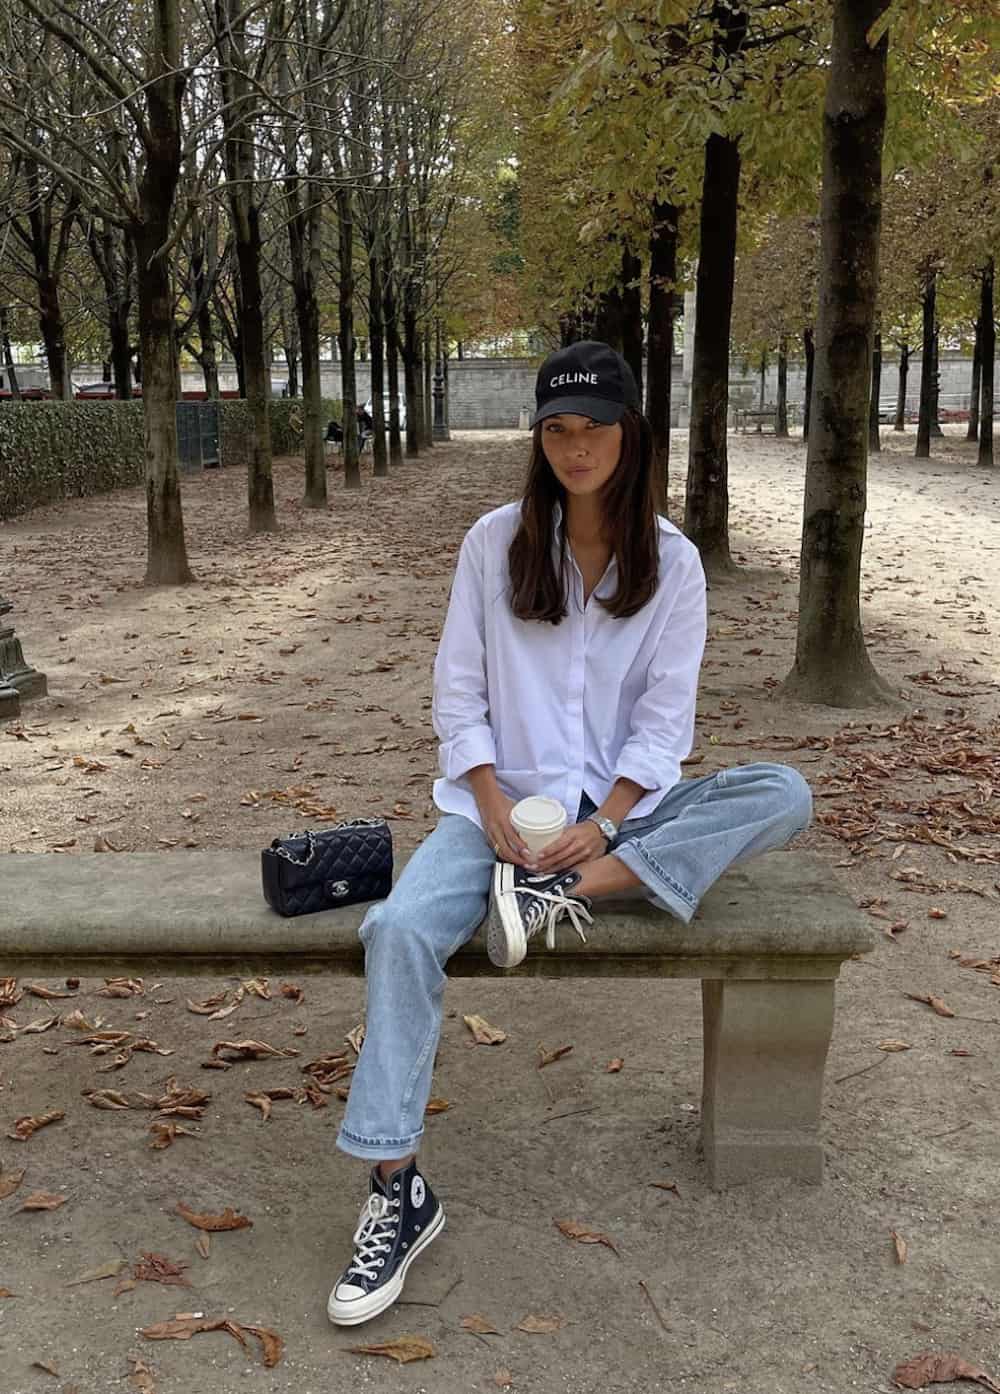 image of a woman sitting on a bench in a park wearing a white button up shirt, jeans, and high top sneakers